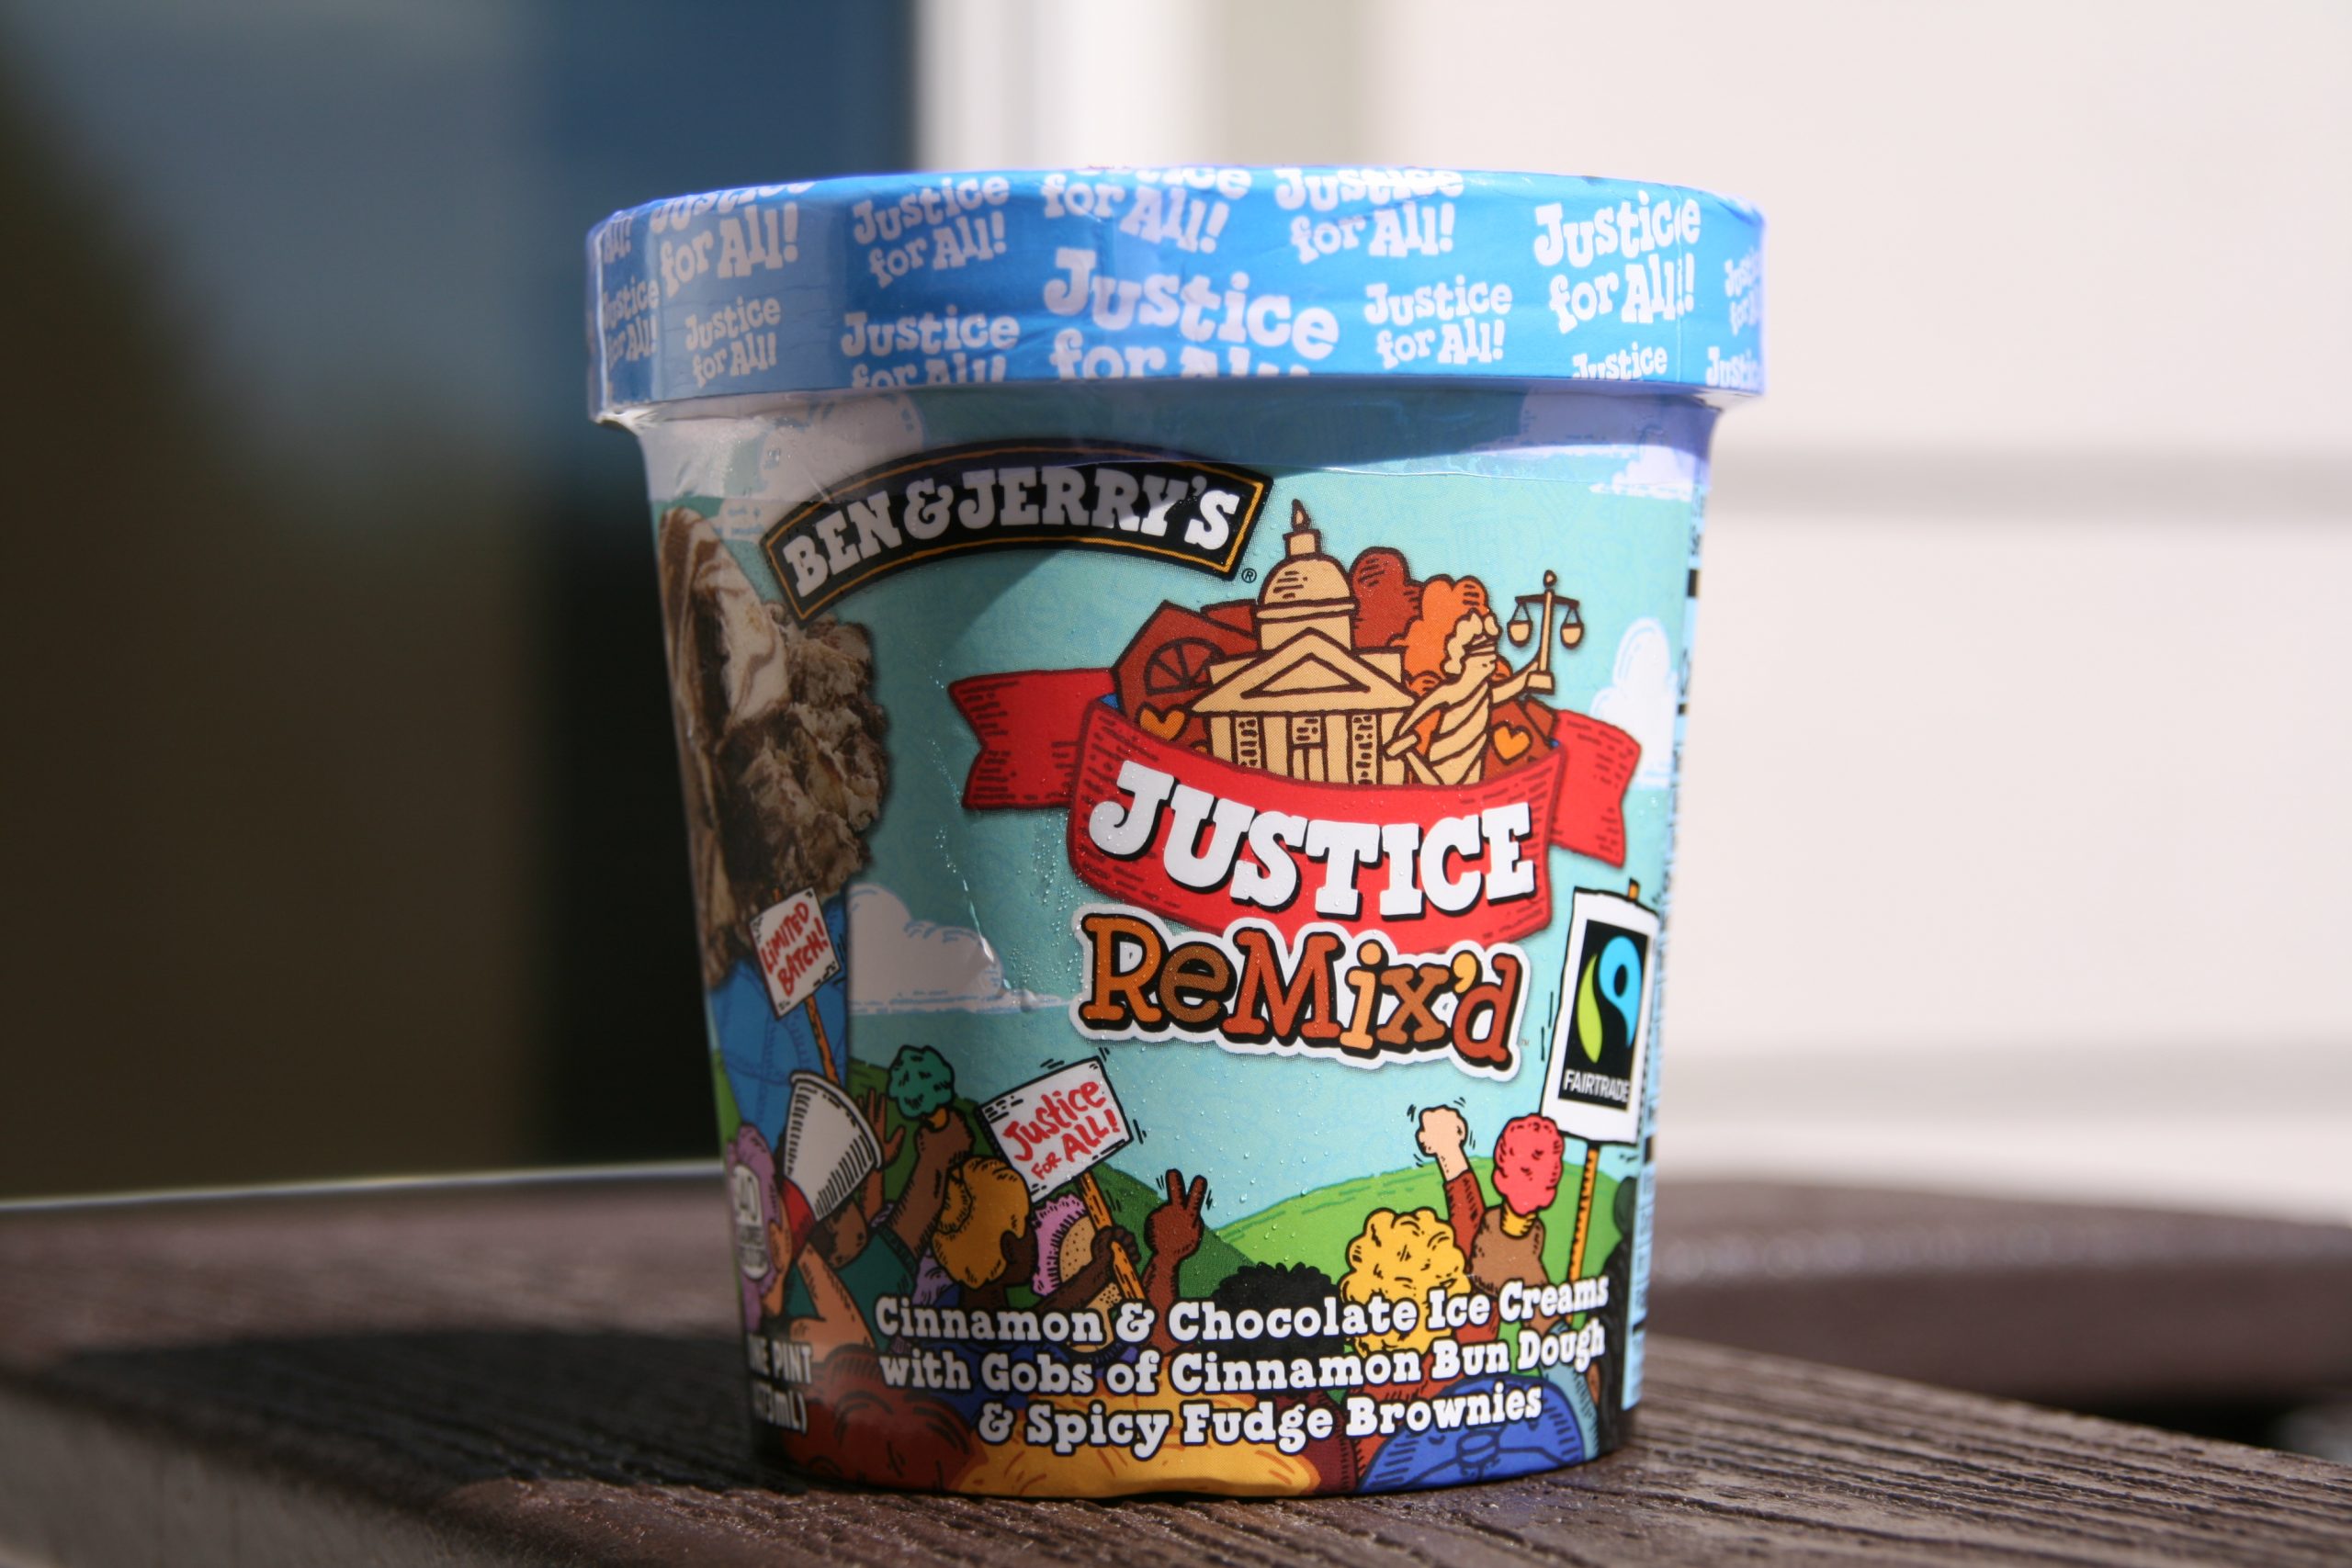 photograph of Ben & Jerry's Justice ReMix'd ice cream container